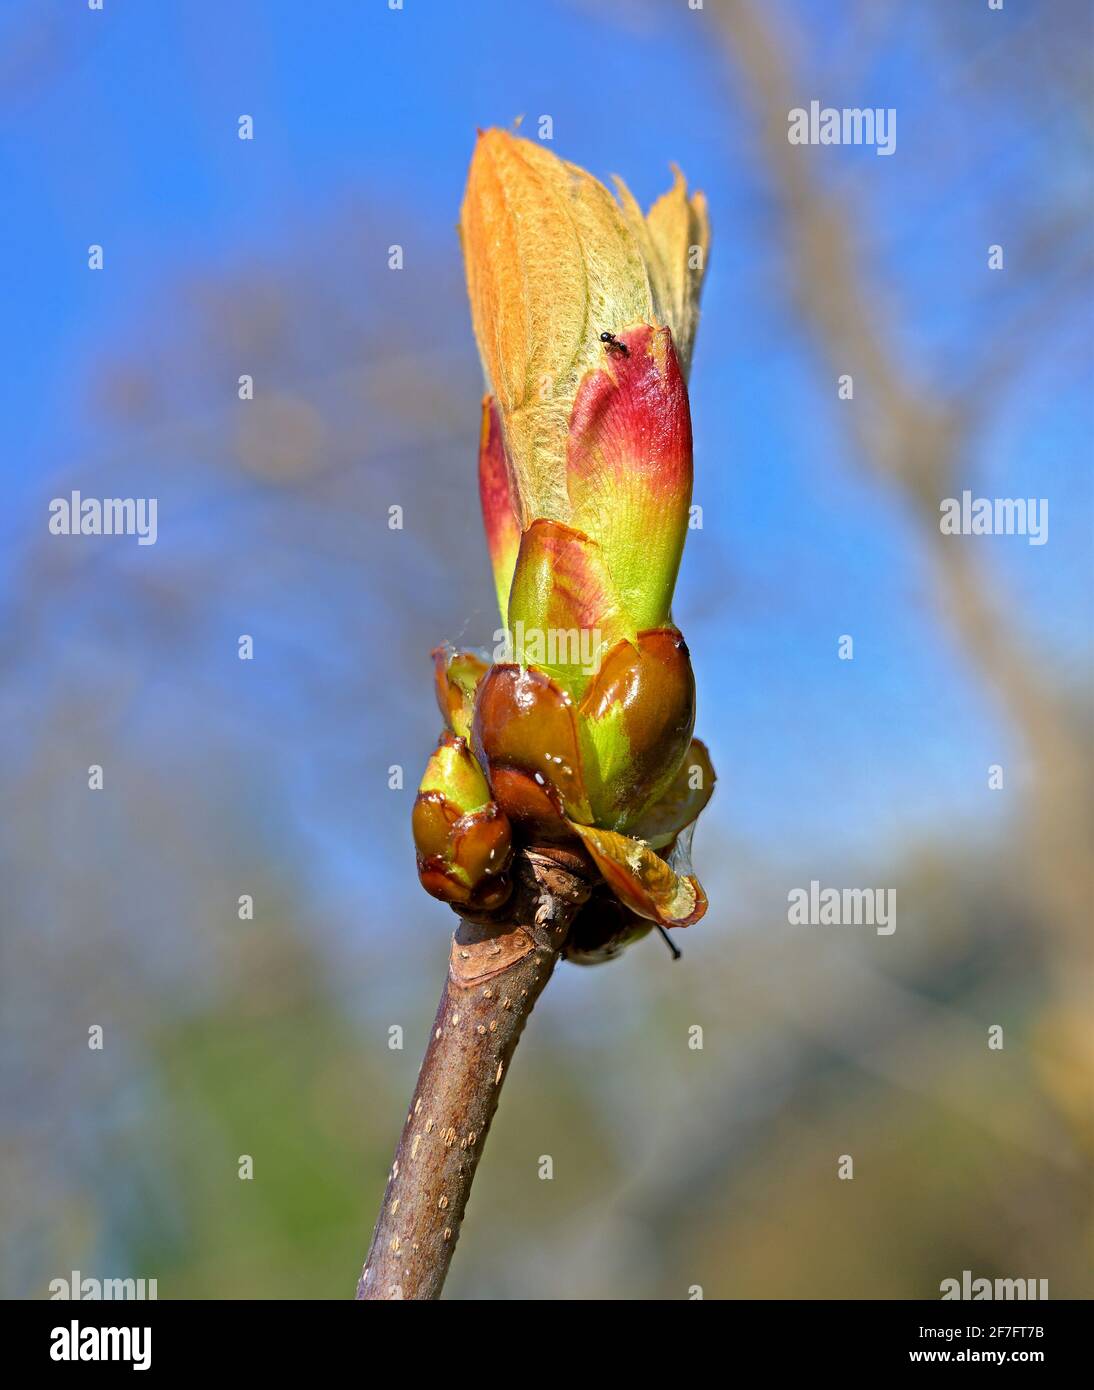 colorful partly open bud of a chestnut tree at sunshine with a black ant on it, Austria Stock Photo